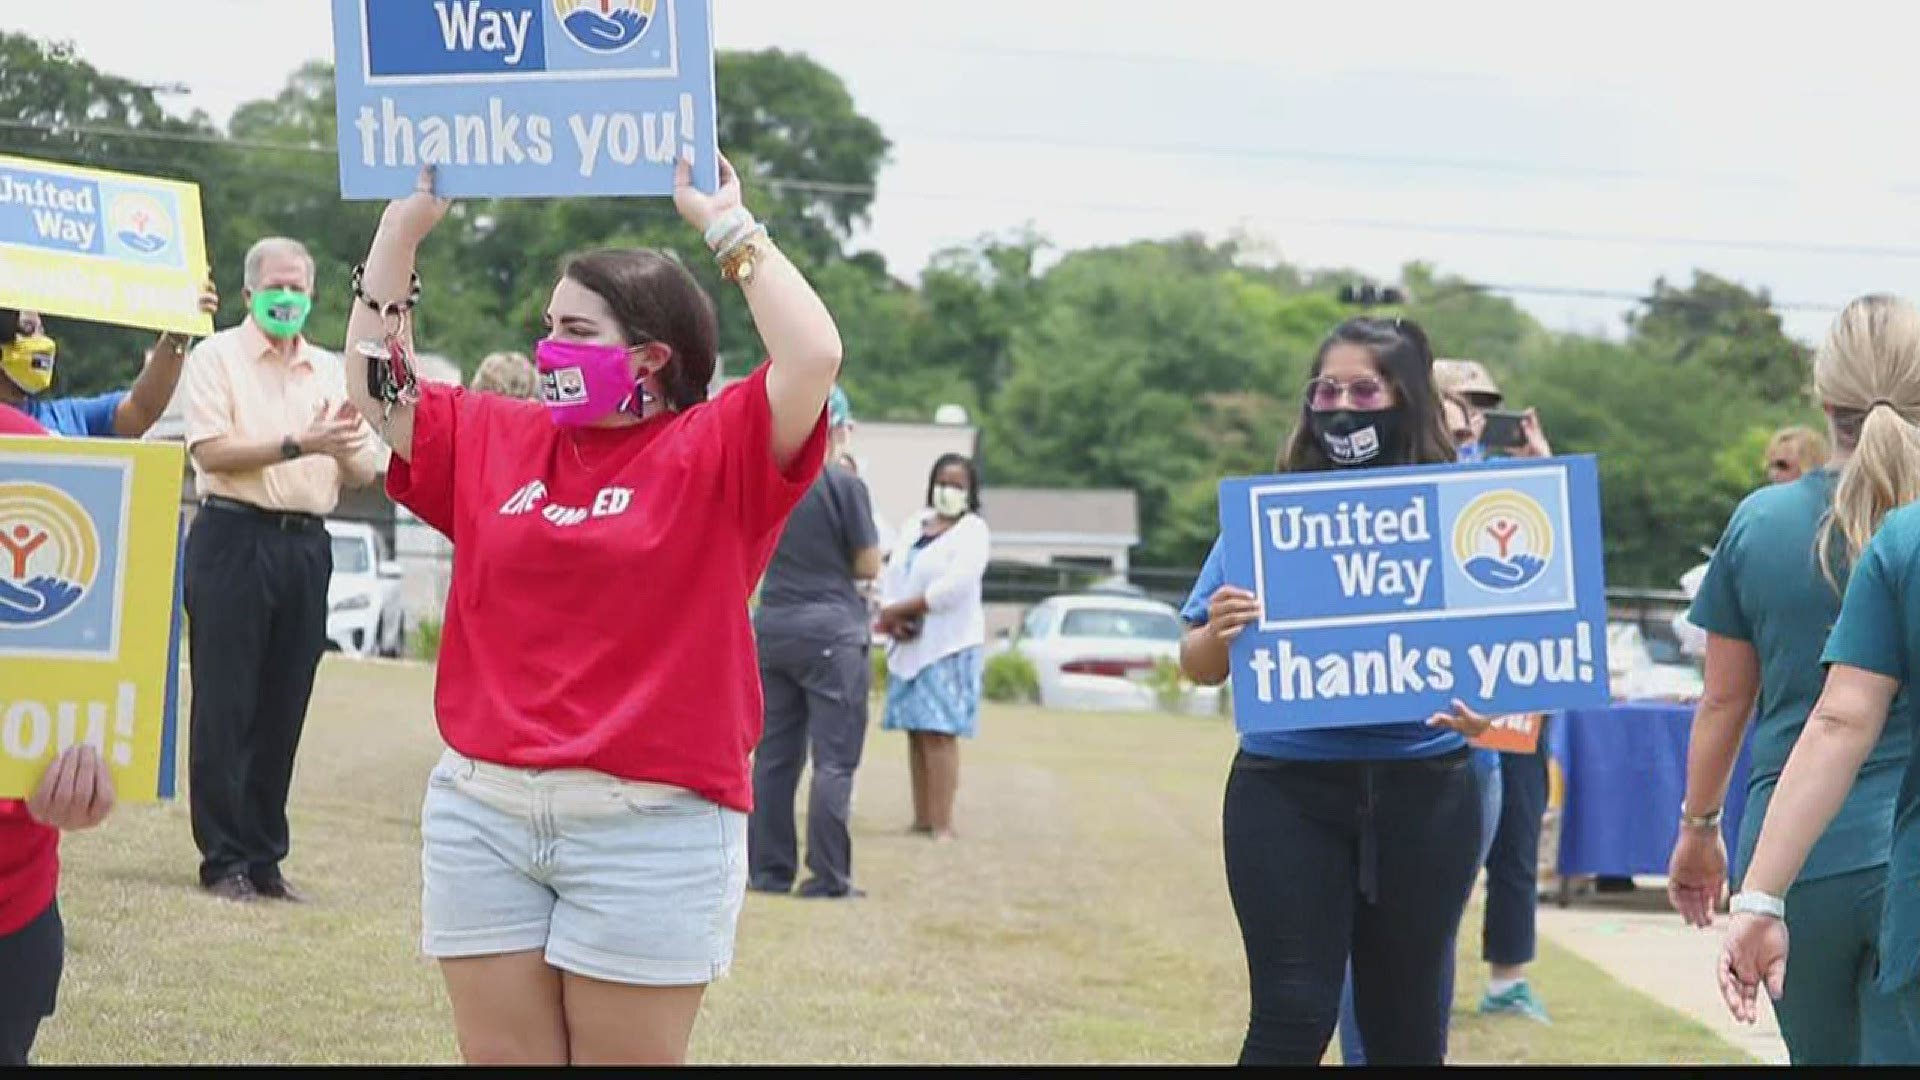 United Way of Central Georgia raised a record-breaking $5,208,497 with their campaign